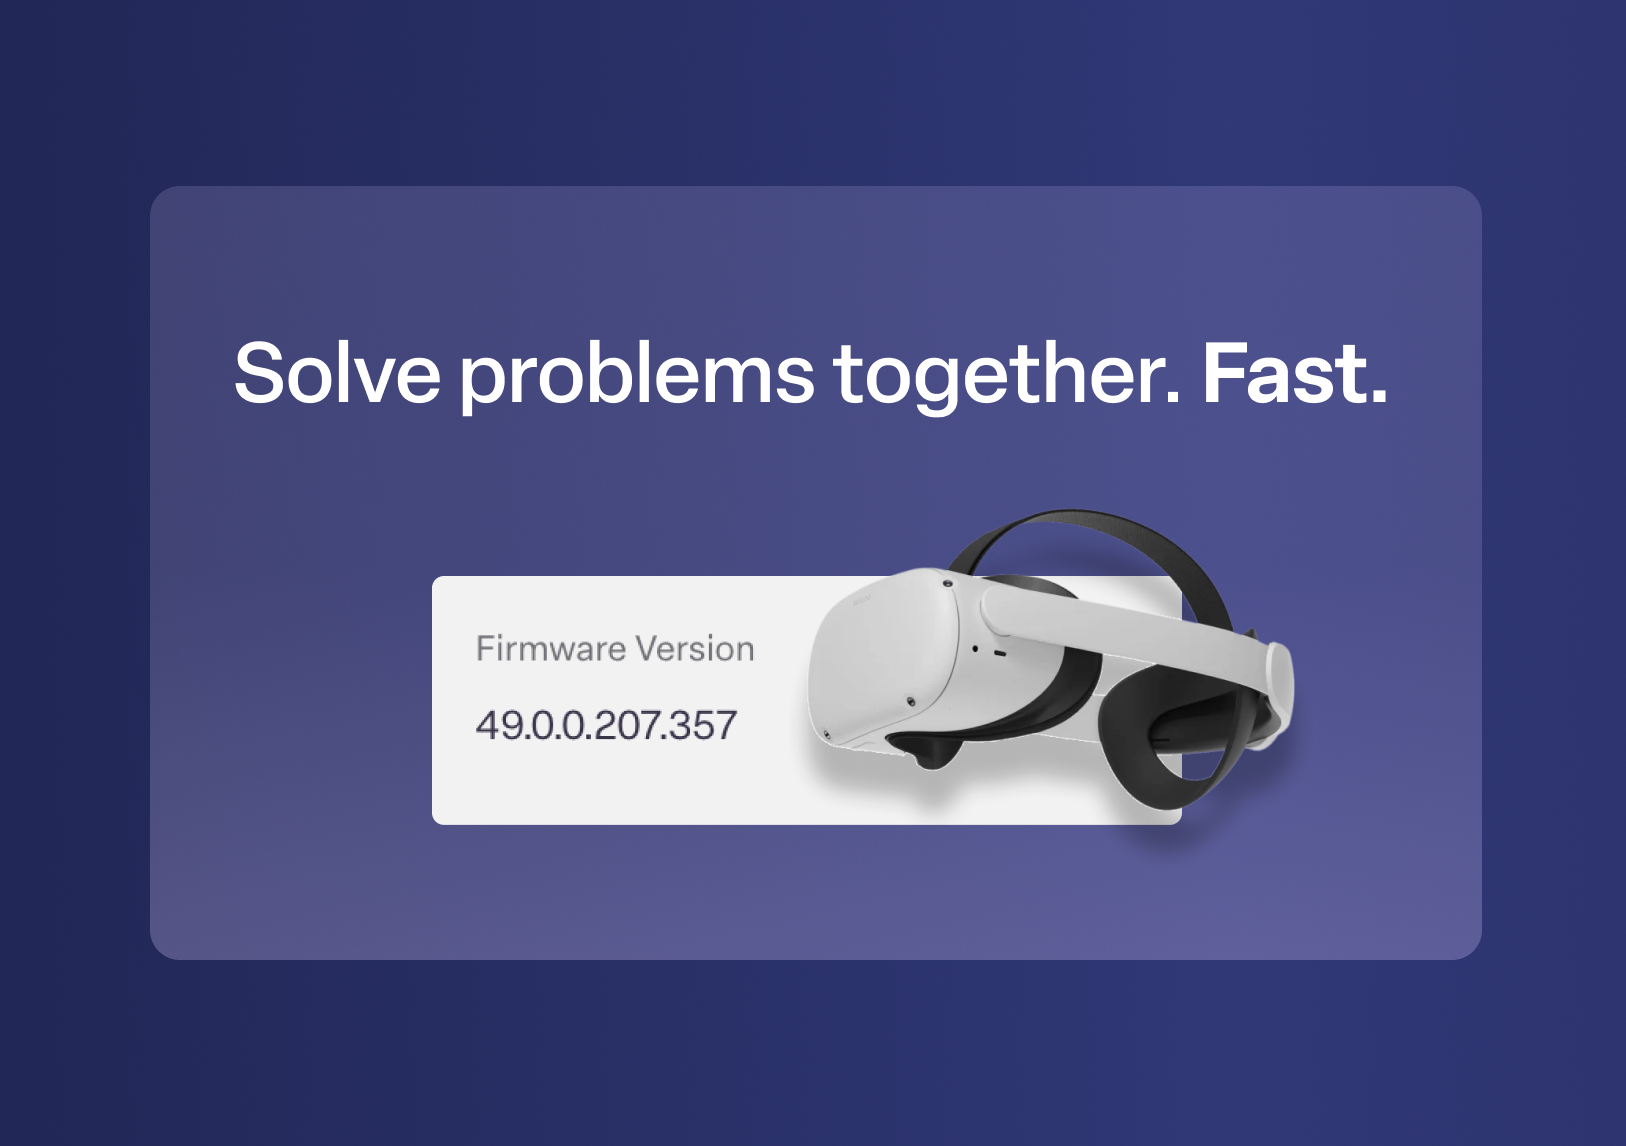 Image of headset with text: Solve problems together. Fast.